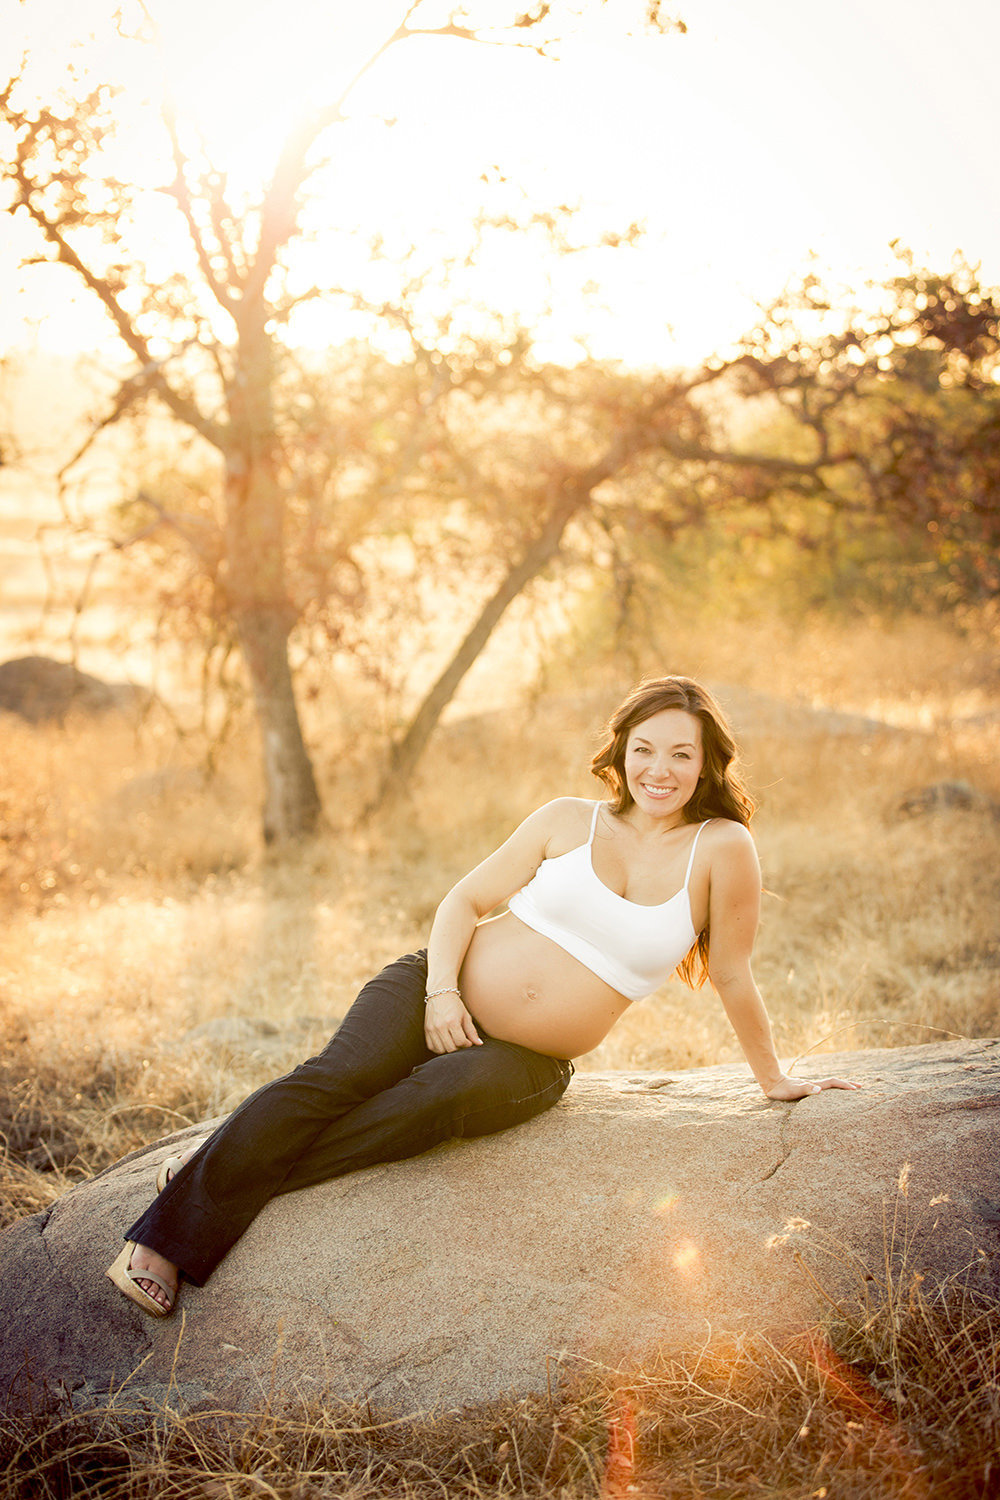 Lovely lighting for Maternity Session in San Diego.